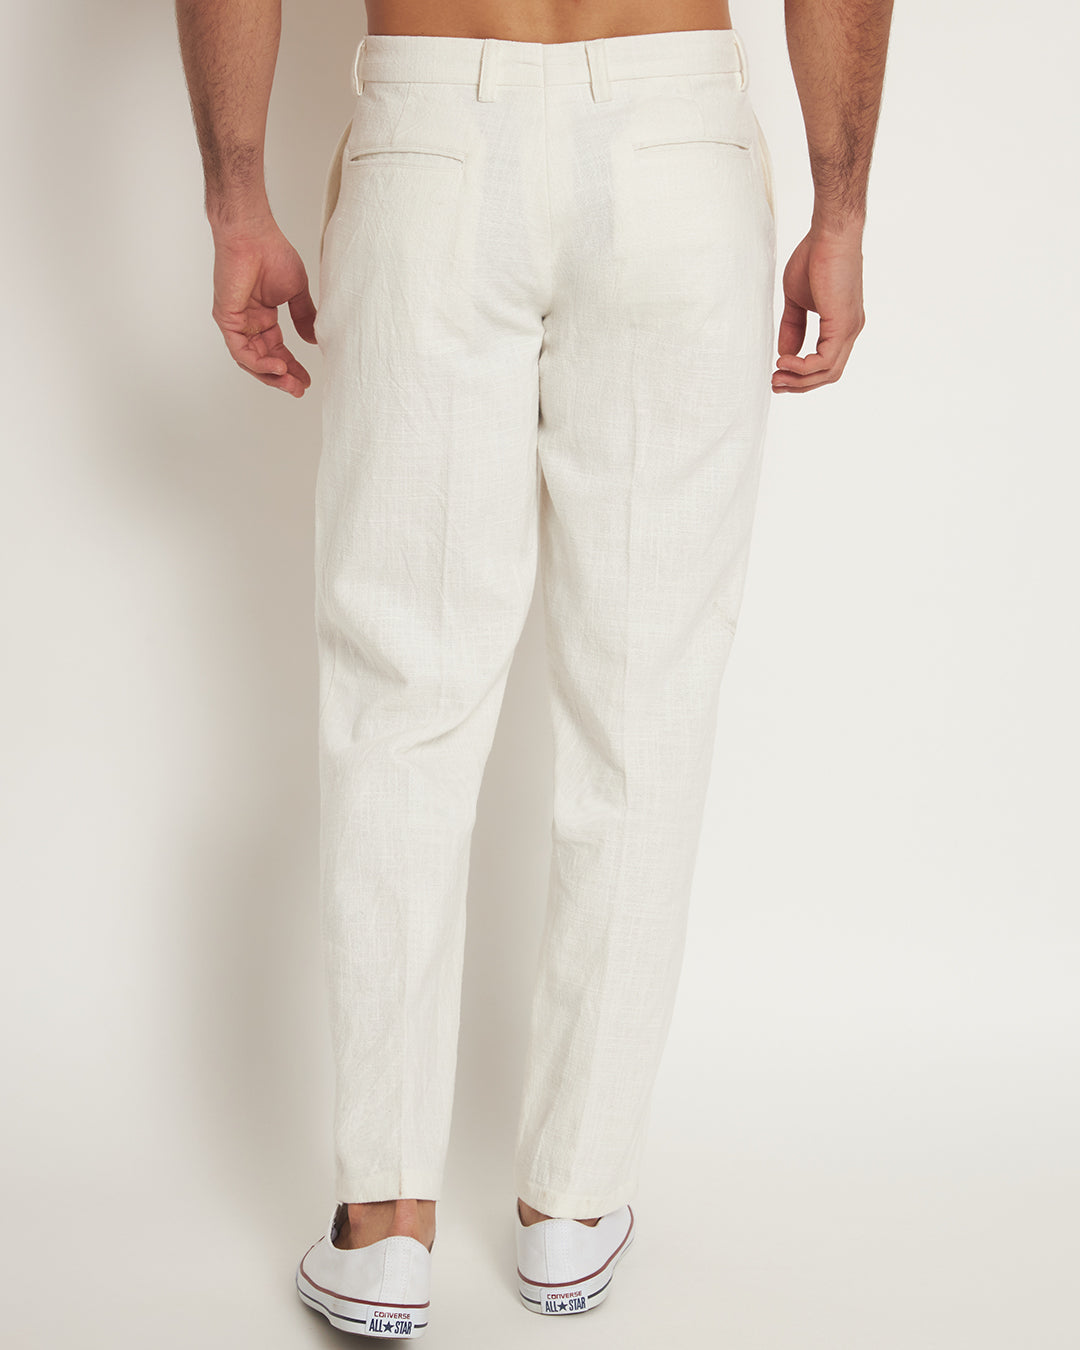 Viggo | Malmo Skinny Fit Men's White Suit Trousers | Suit Direct